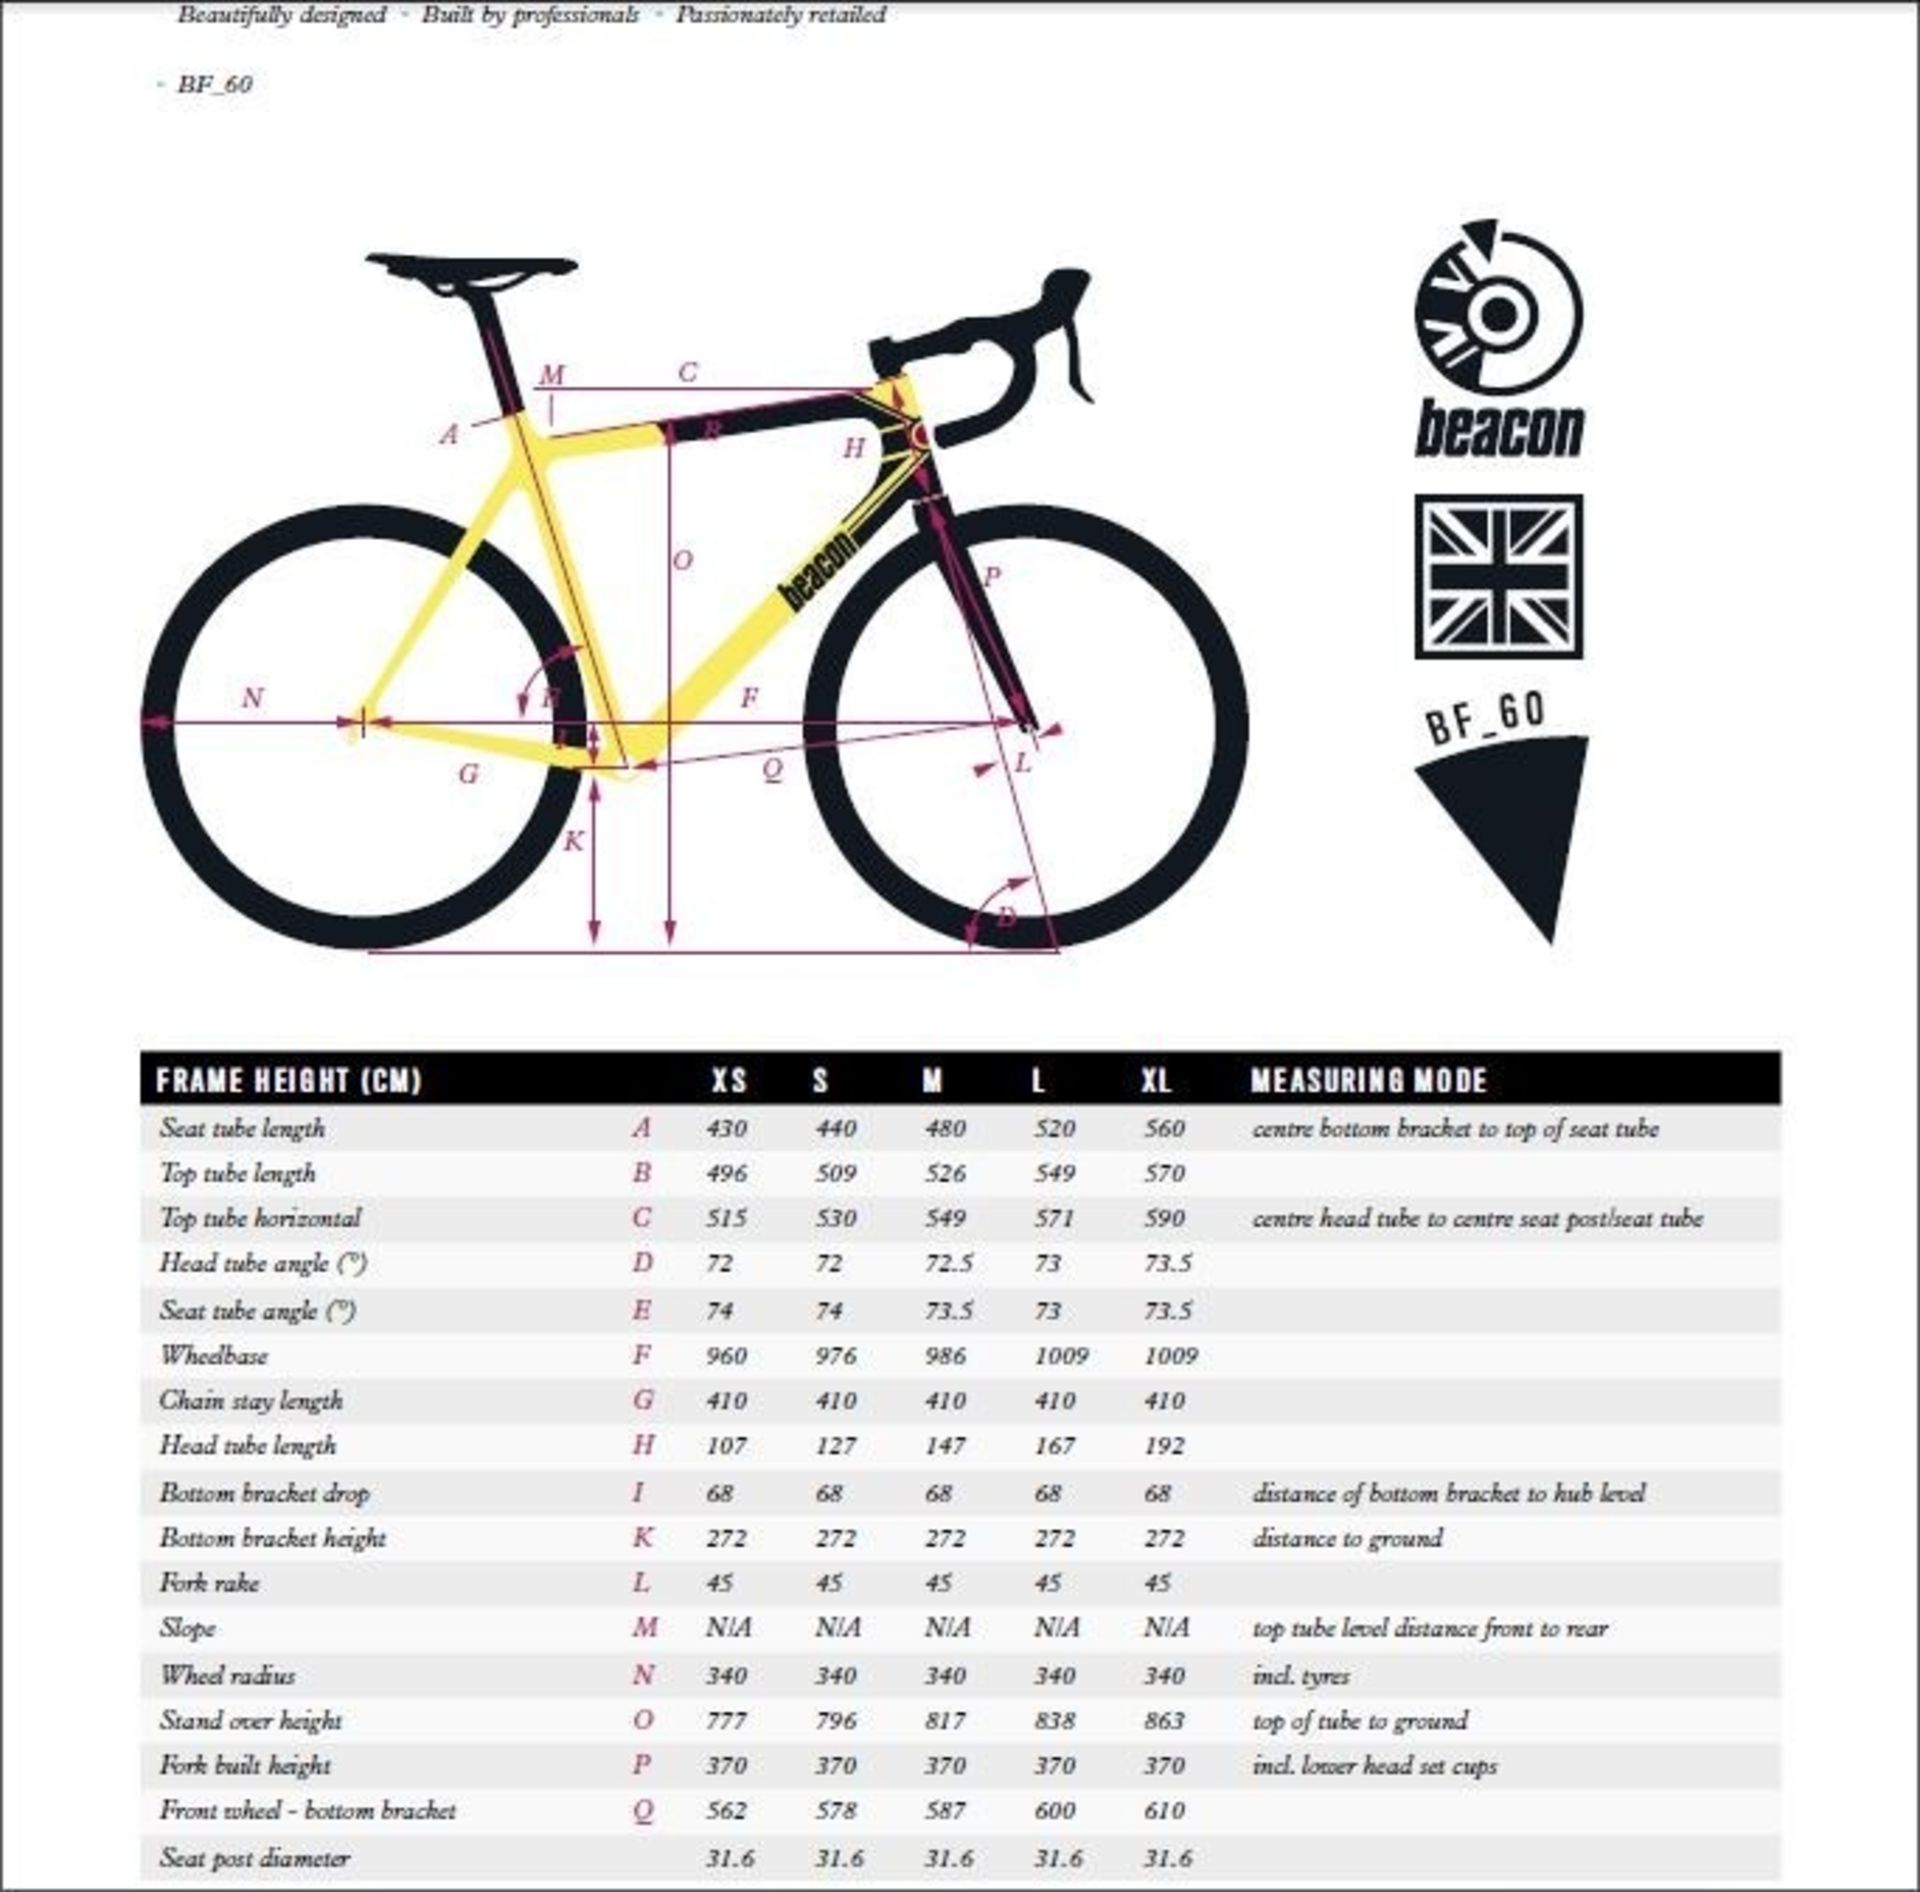 1 x Beacon Model BF-60, Size 430, Carbon Fibre Bike Frame in Yellow & Black. - Image 3 of 3